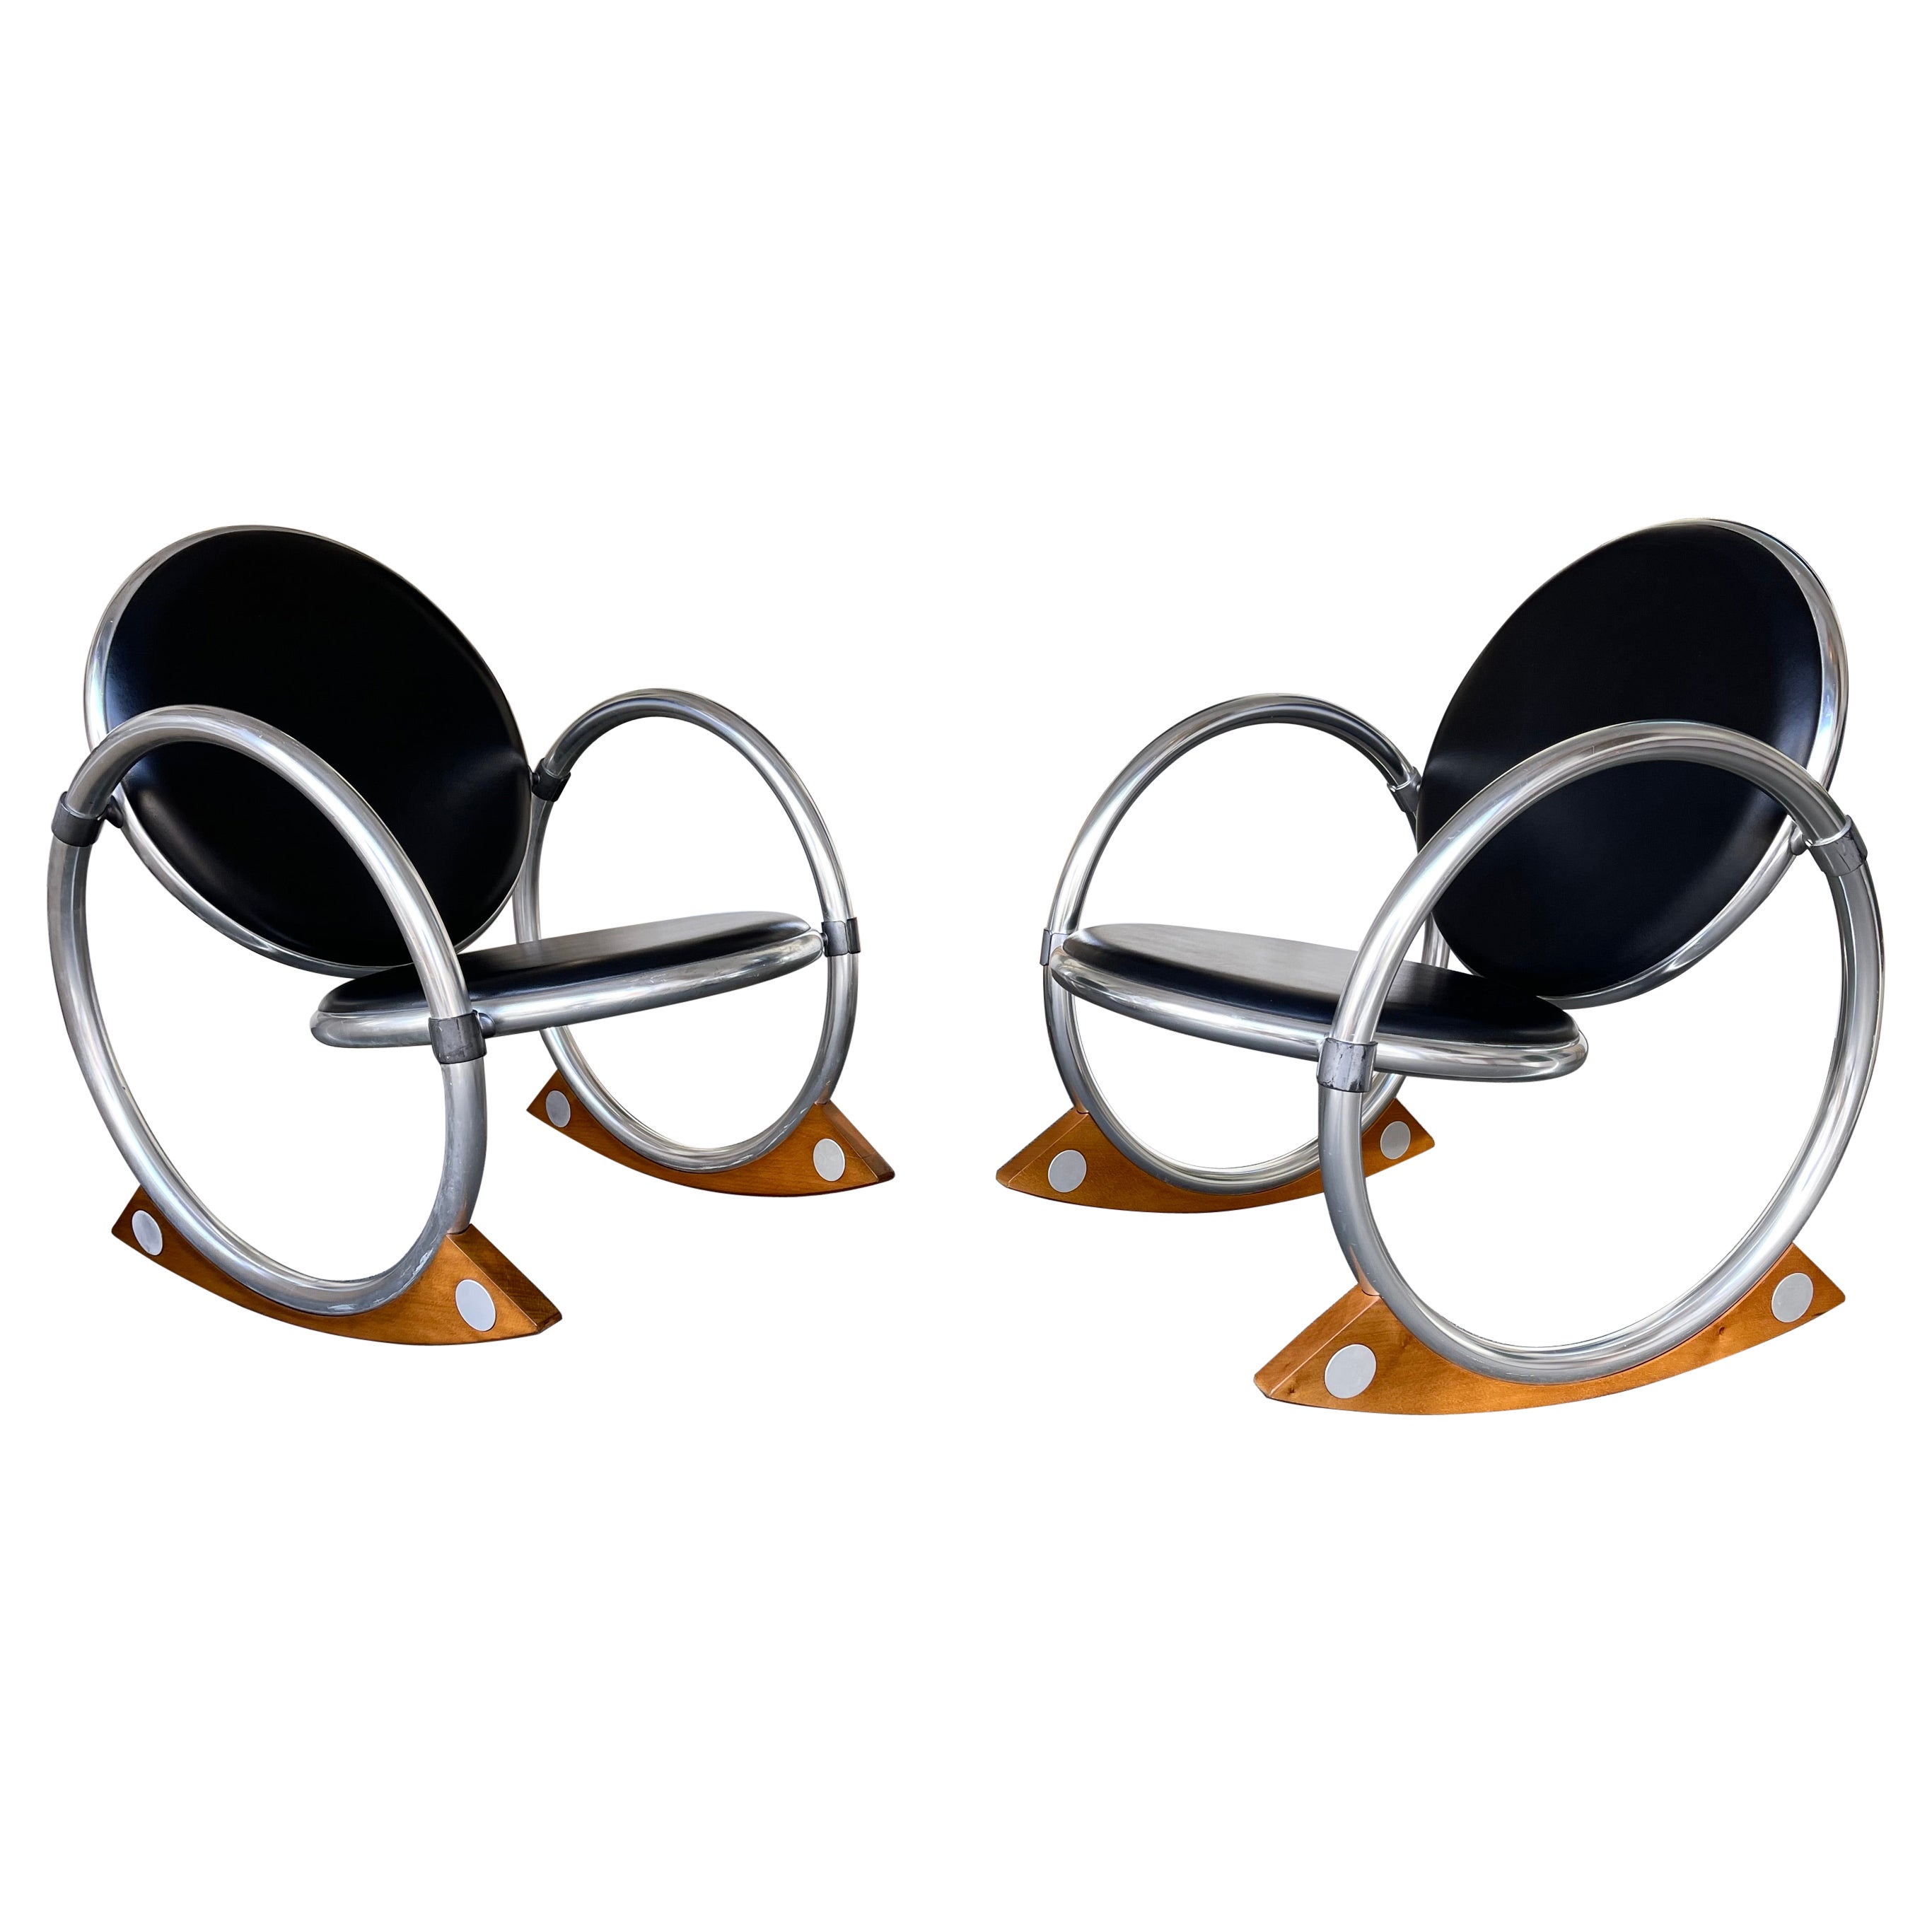 Rocking Chairs Dondolo by Verner Panton for Ycami, Italy, 1990s For Sale